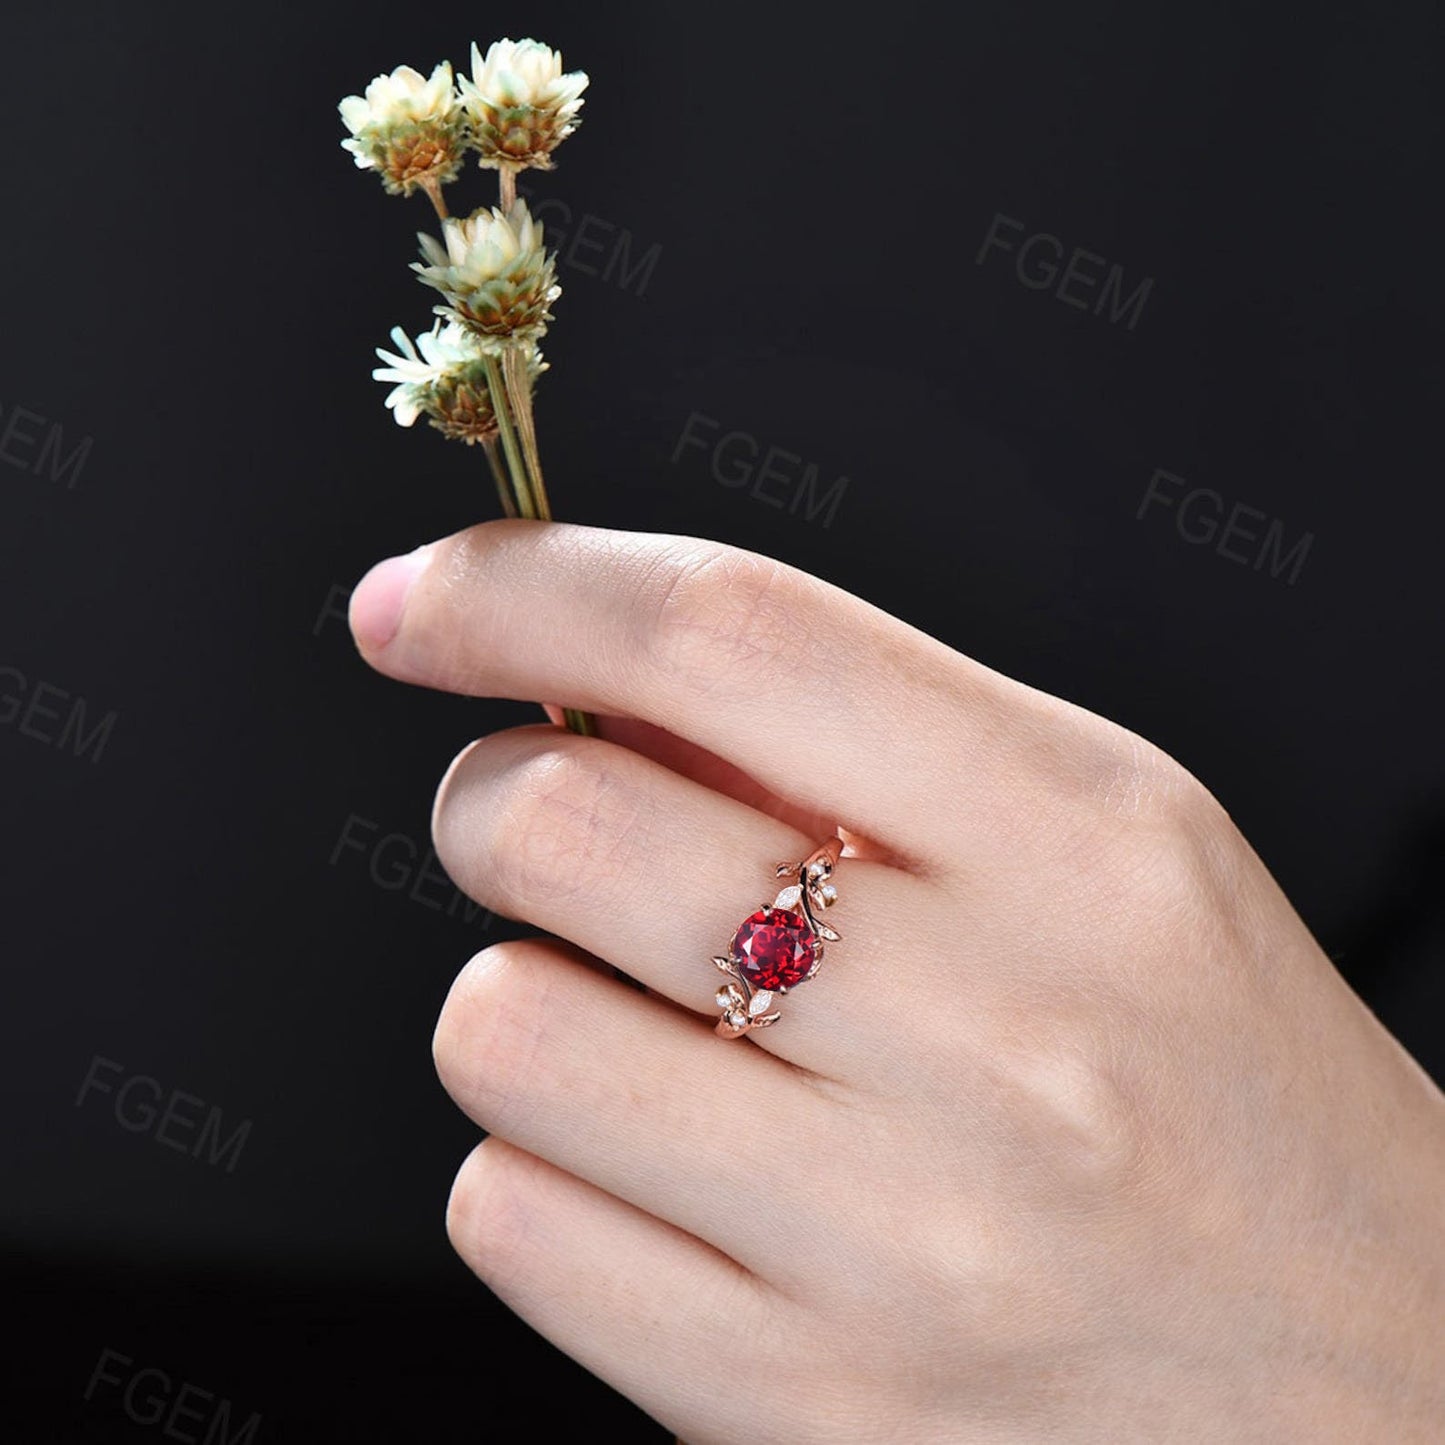 1ct Round Nature Inspired Ruby Engagement Ring Red Gemstone Jewelry Twig Leaf Cluster Moissanite Ring Anniversary Ring July Birthstone Gift